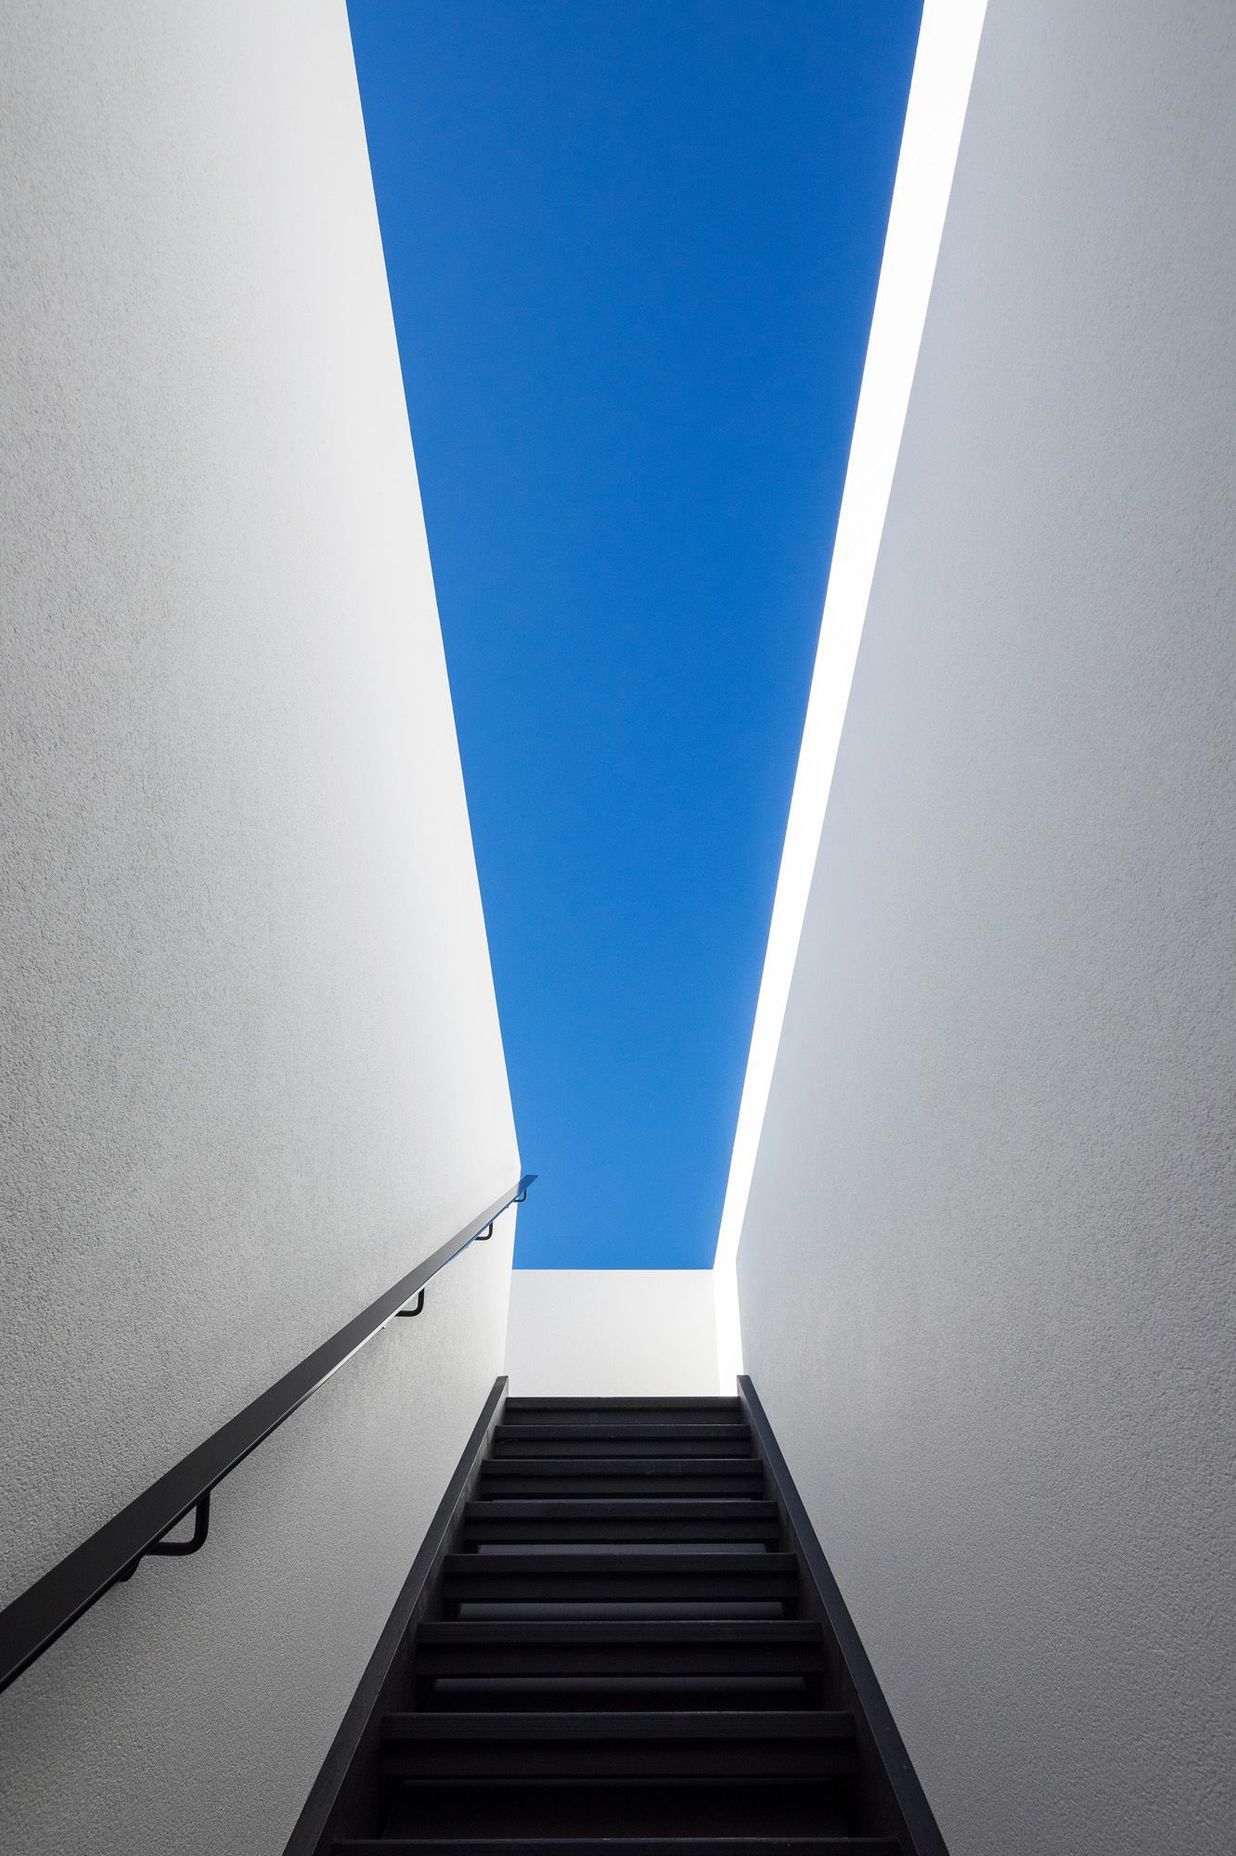 At the top of the stairwell, a large skylight opens the house up to the sky.